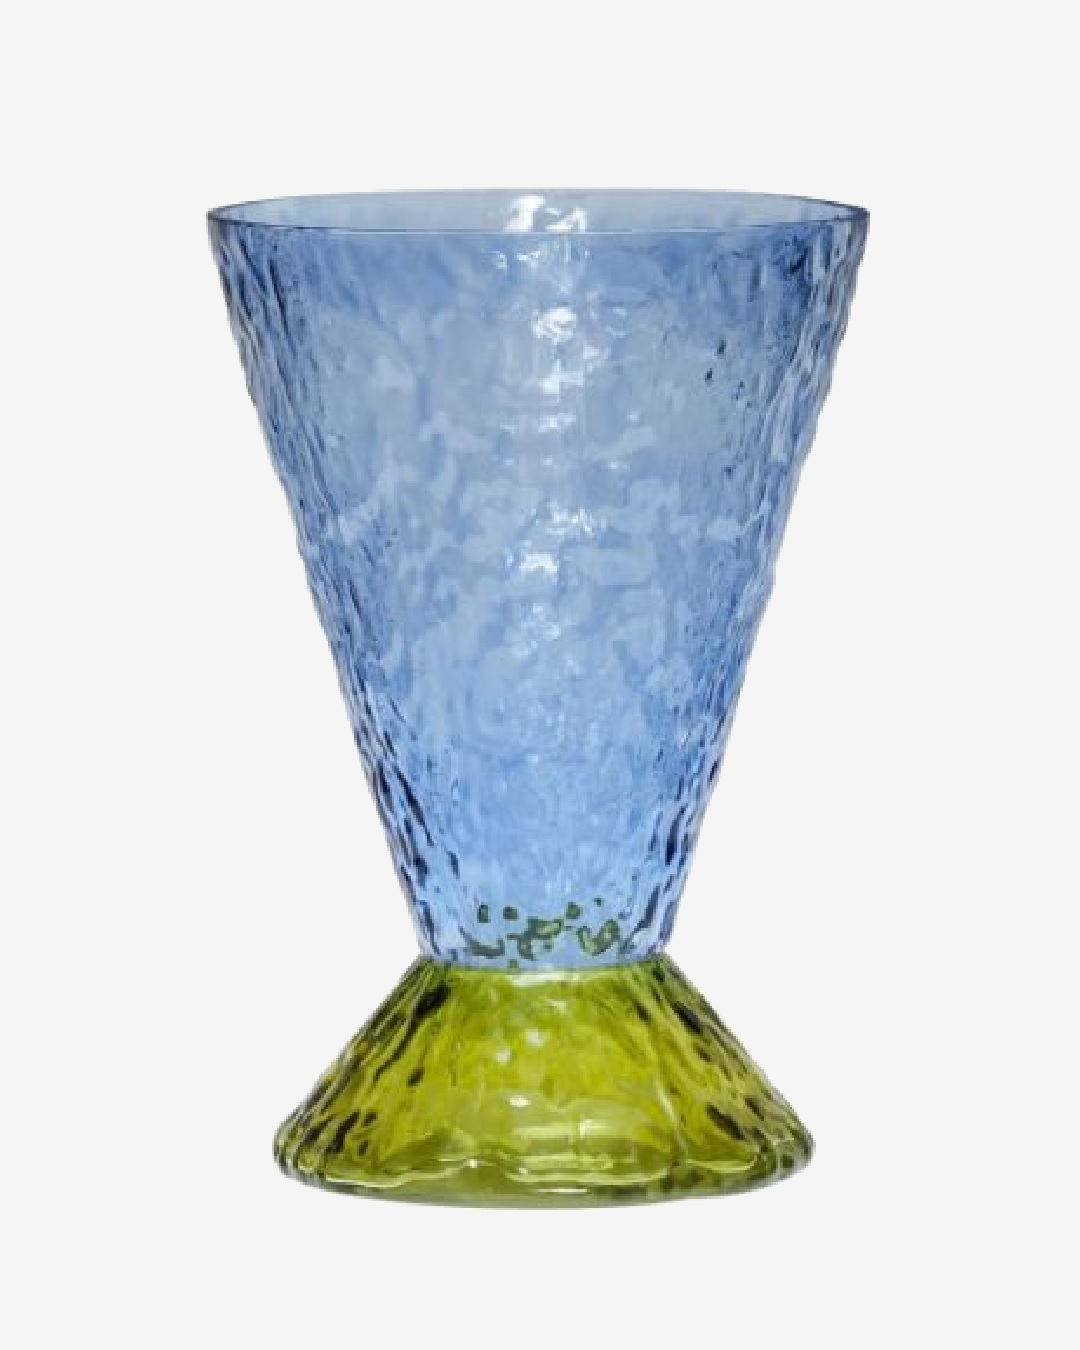 Blue and olive green textured glass vase